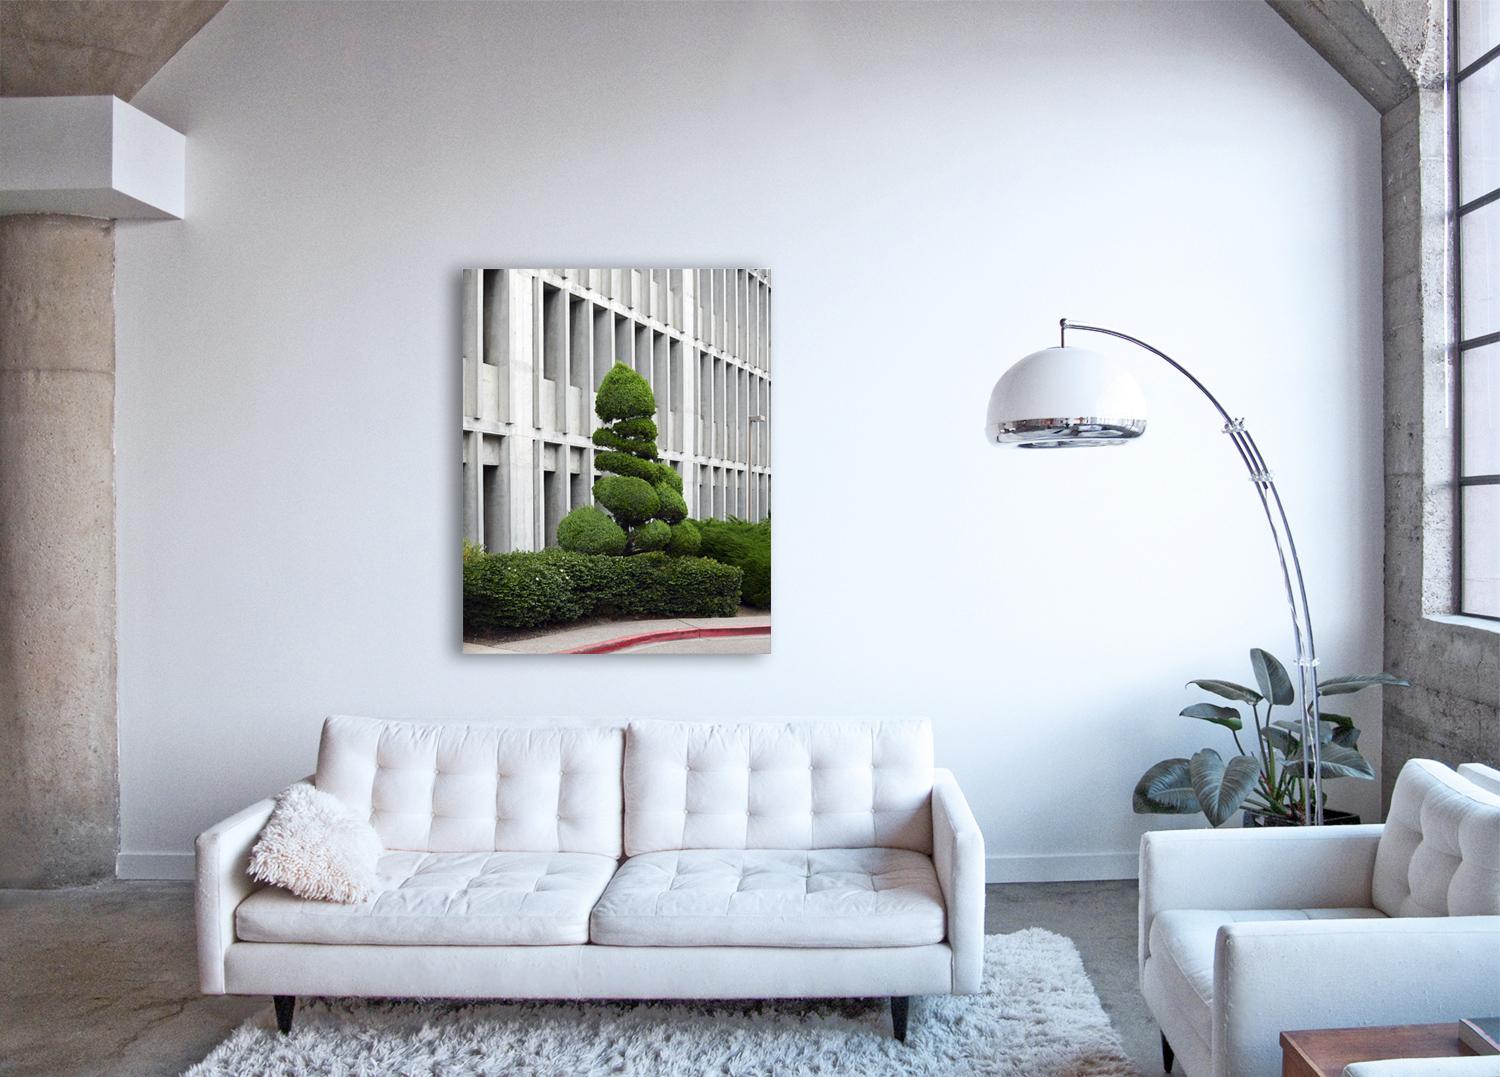 Topiary IV - large format photograph of ornamental shaped tree with architecture - Print by Frank Schott